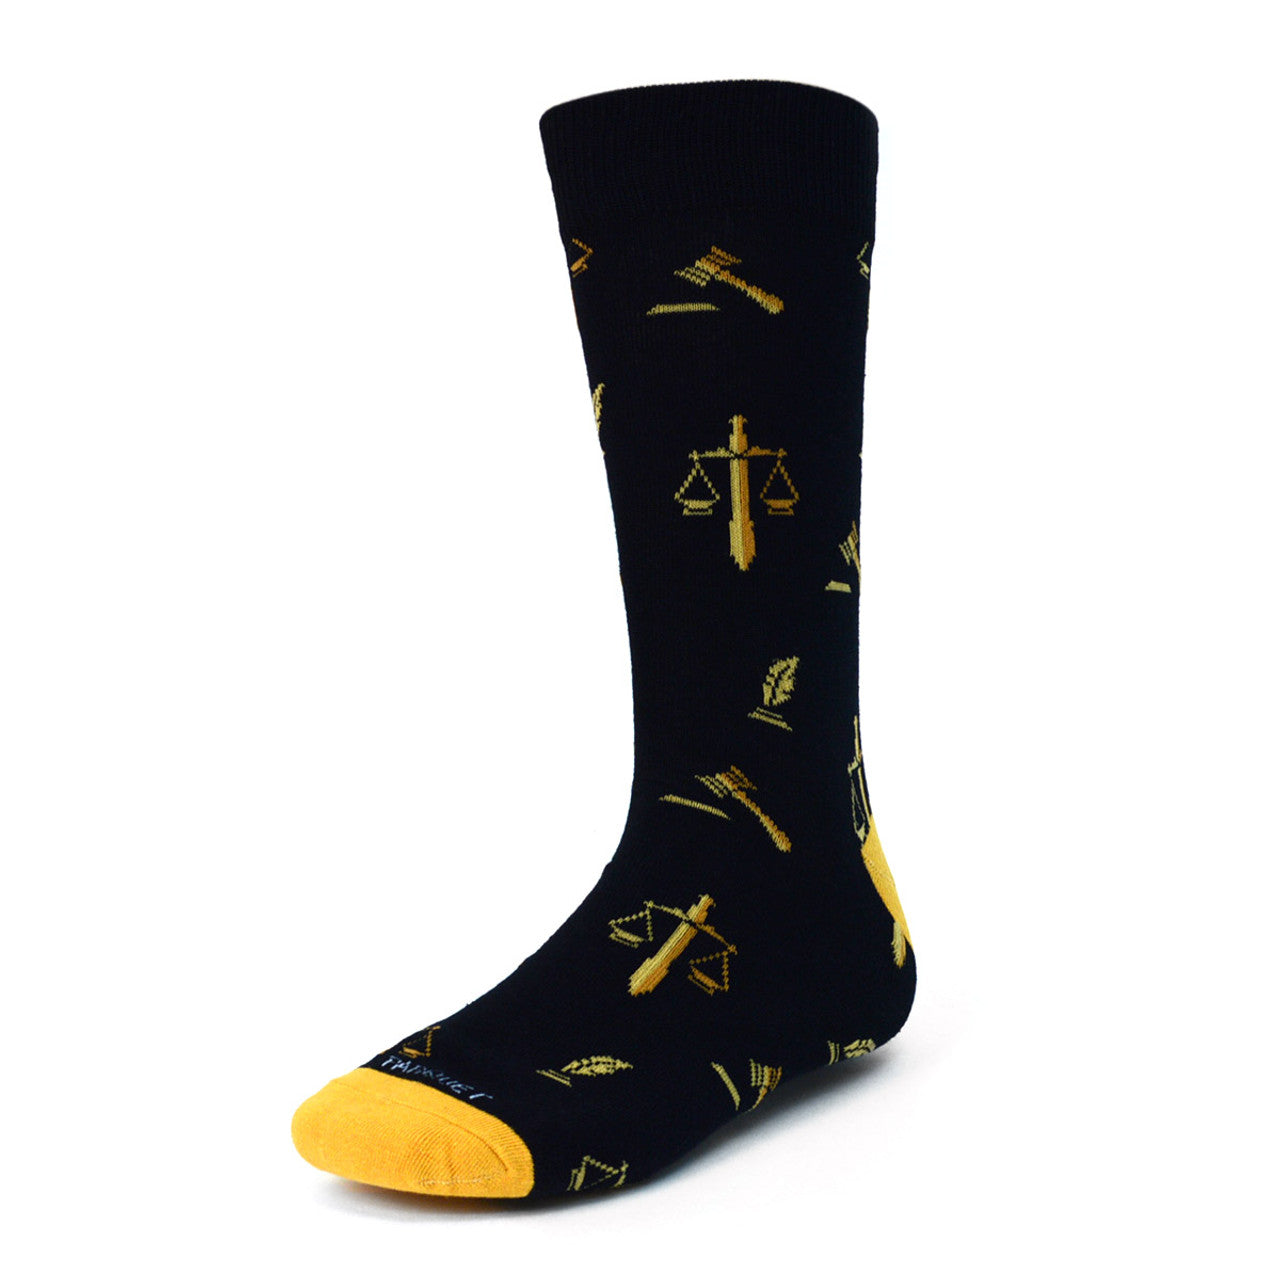 Men's Lawyer Crew Socks - Scale of Justice Quill Gavel Black and Gold